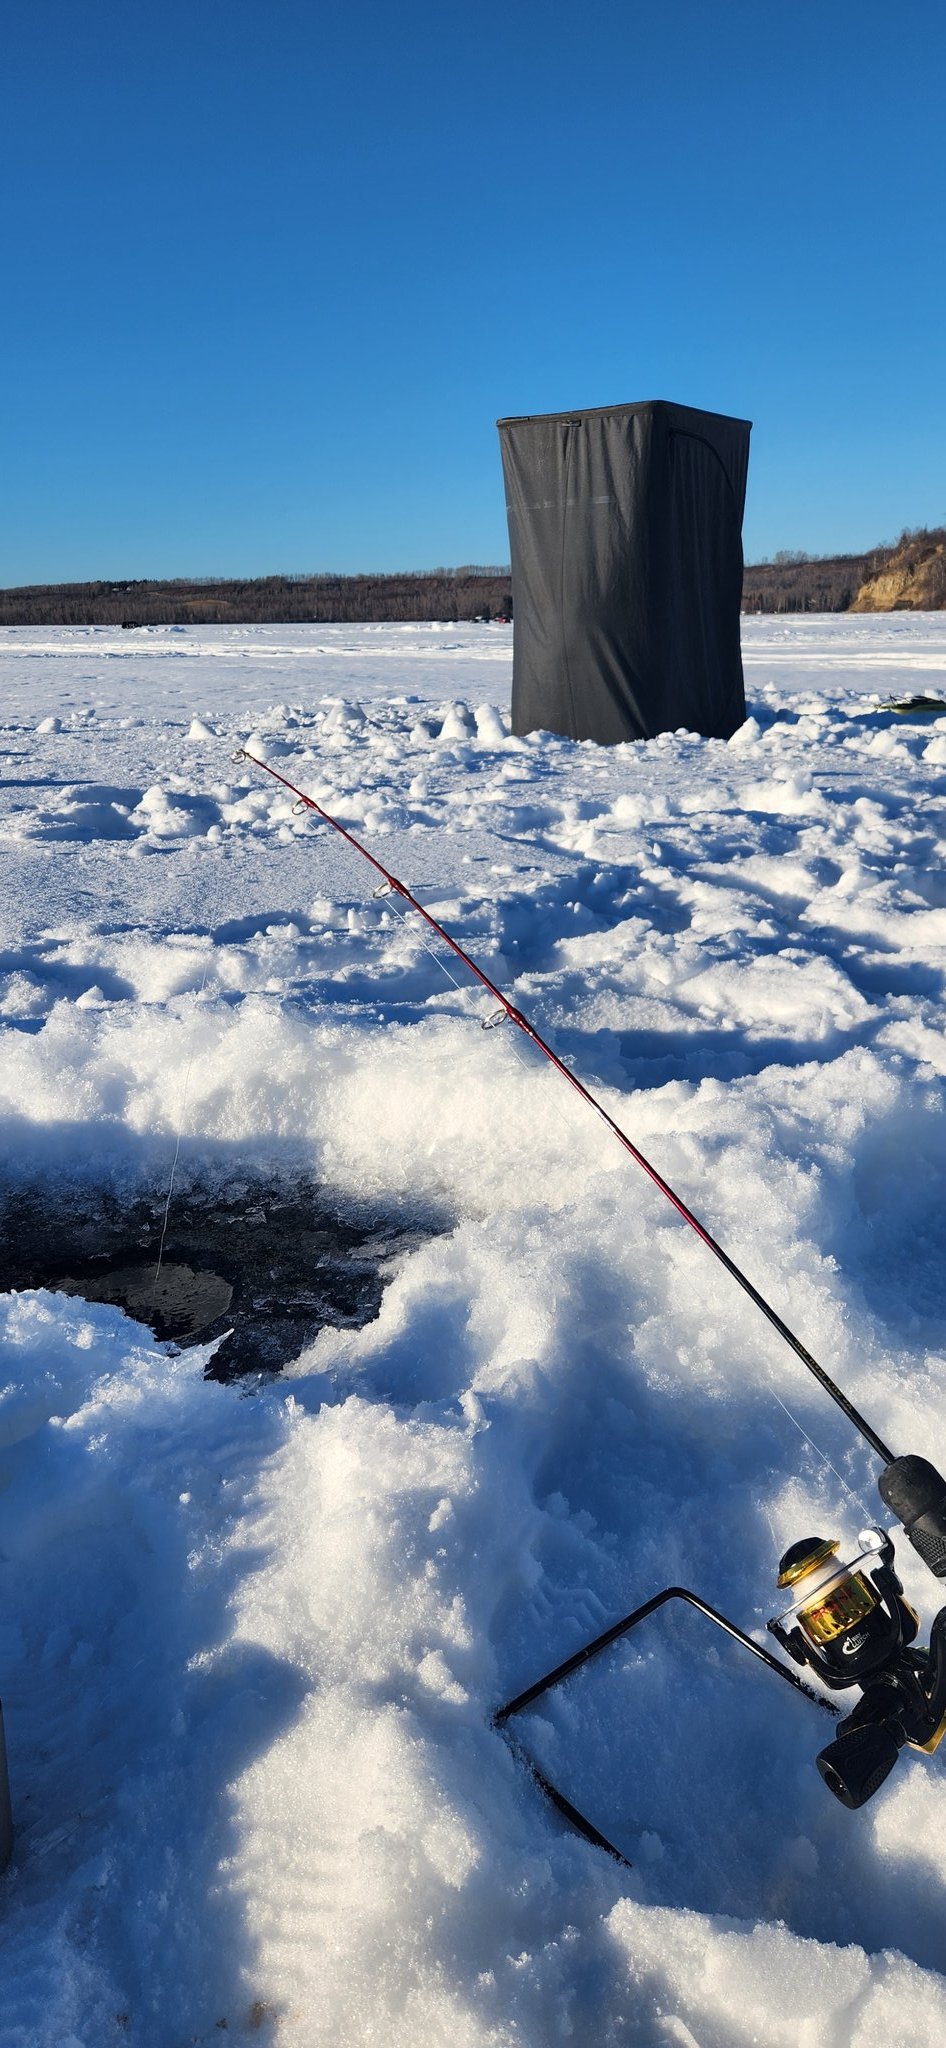 𝐃𝐚𝐧 - 𝐃𝐂 𝐎𝐮𝐭𝐝𝐨𝐨𝐫𝐬 🇨🇦 on X: This was our first test of our ice  fishing run & gun set-up. My son jigged in the 1-man pop-up tent &I jigged  outside. We